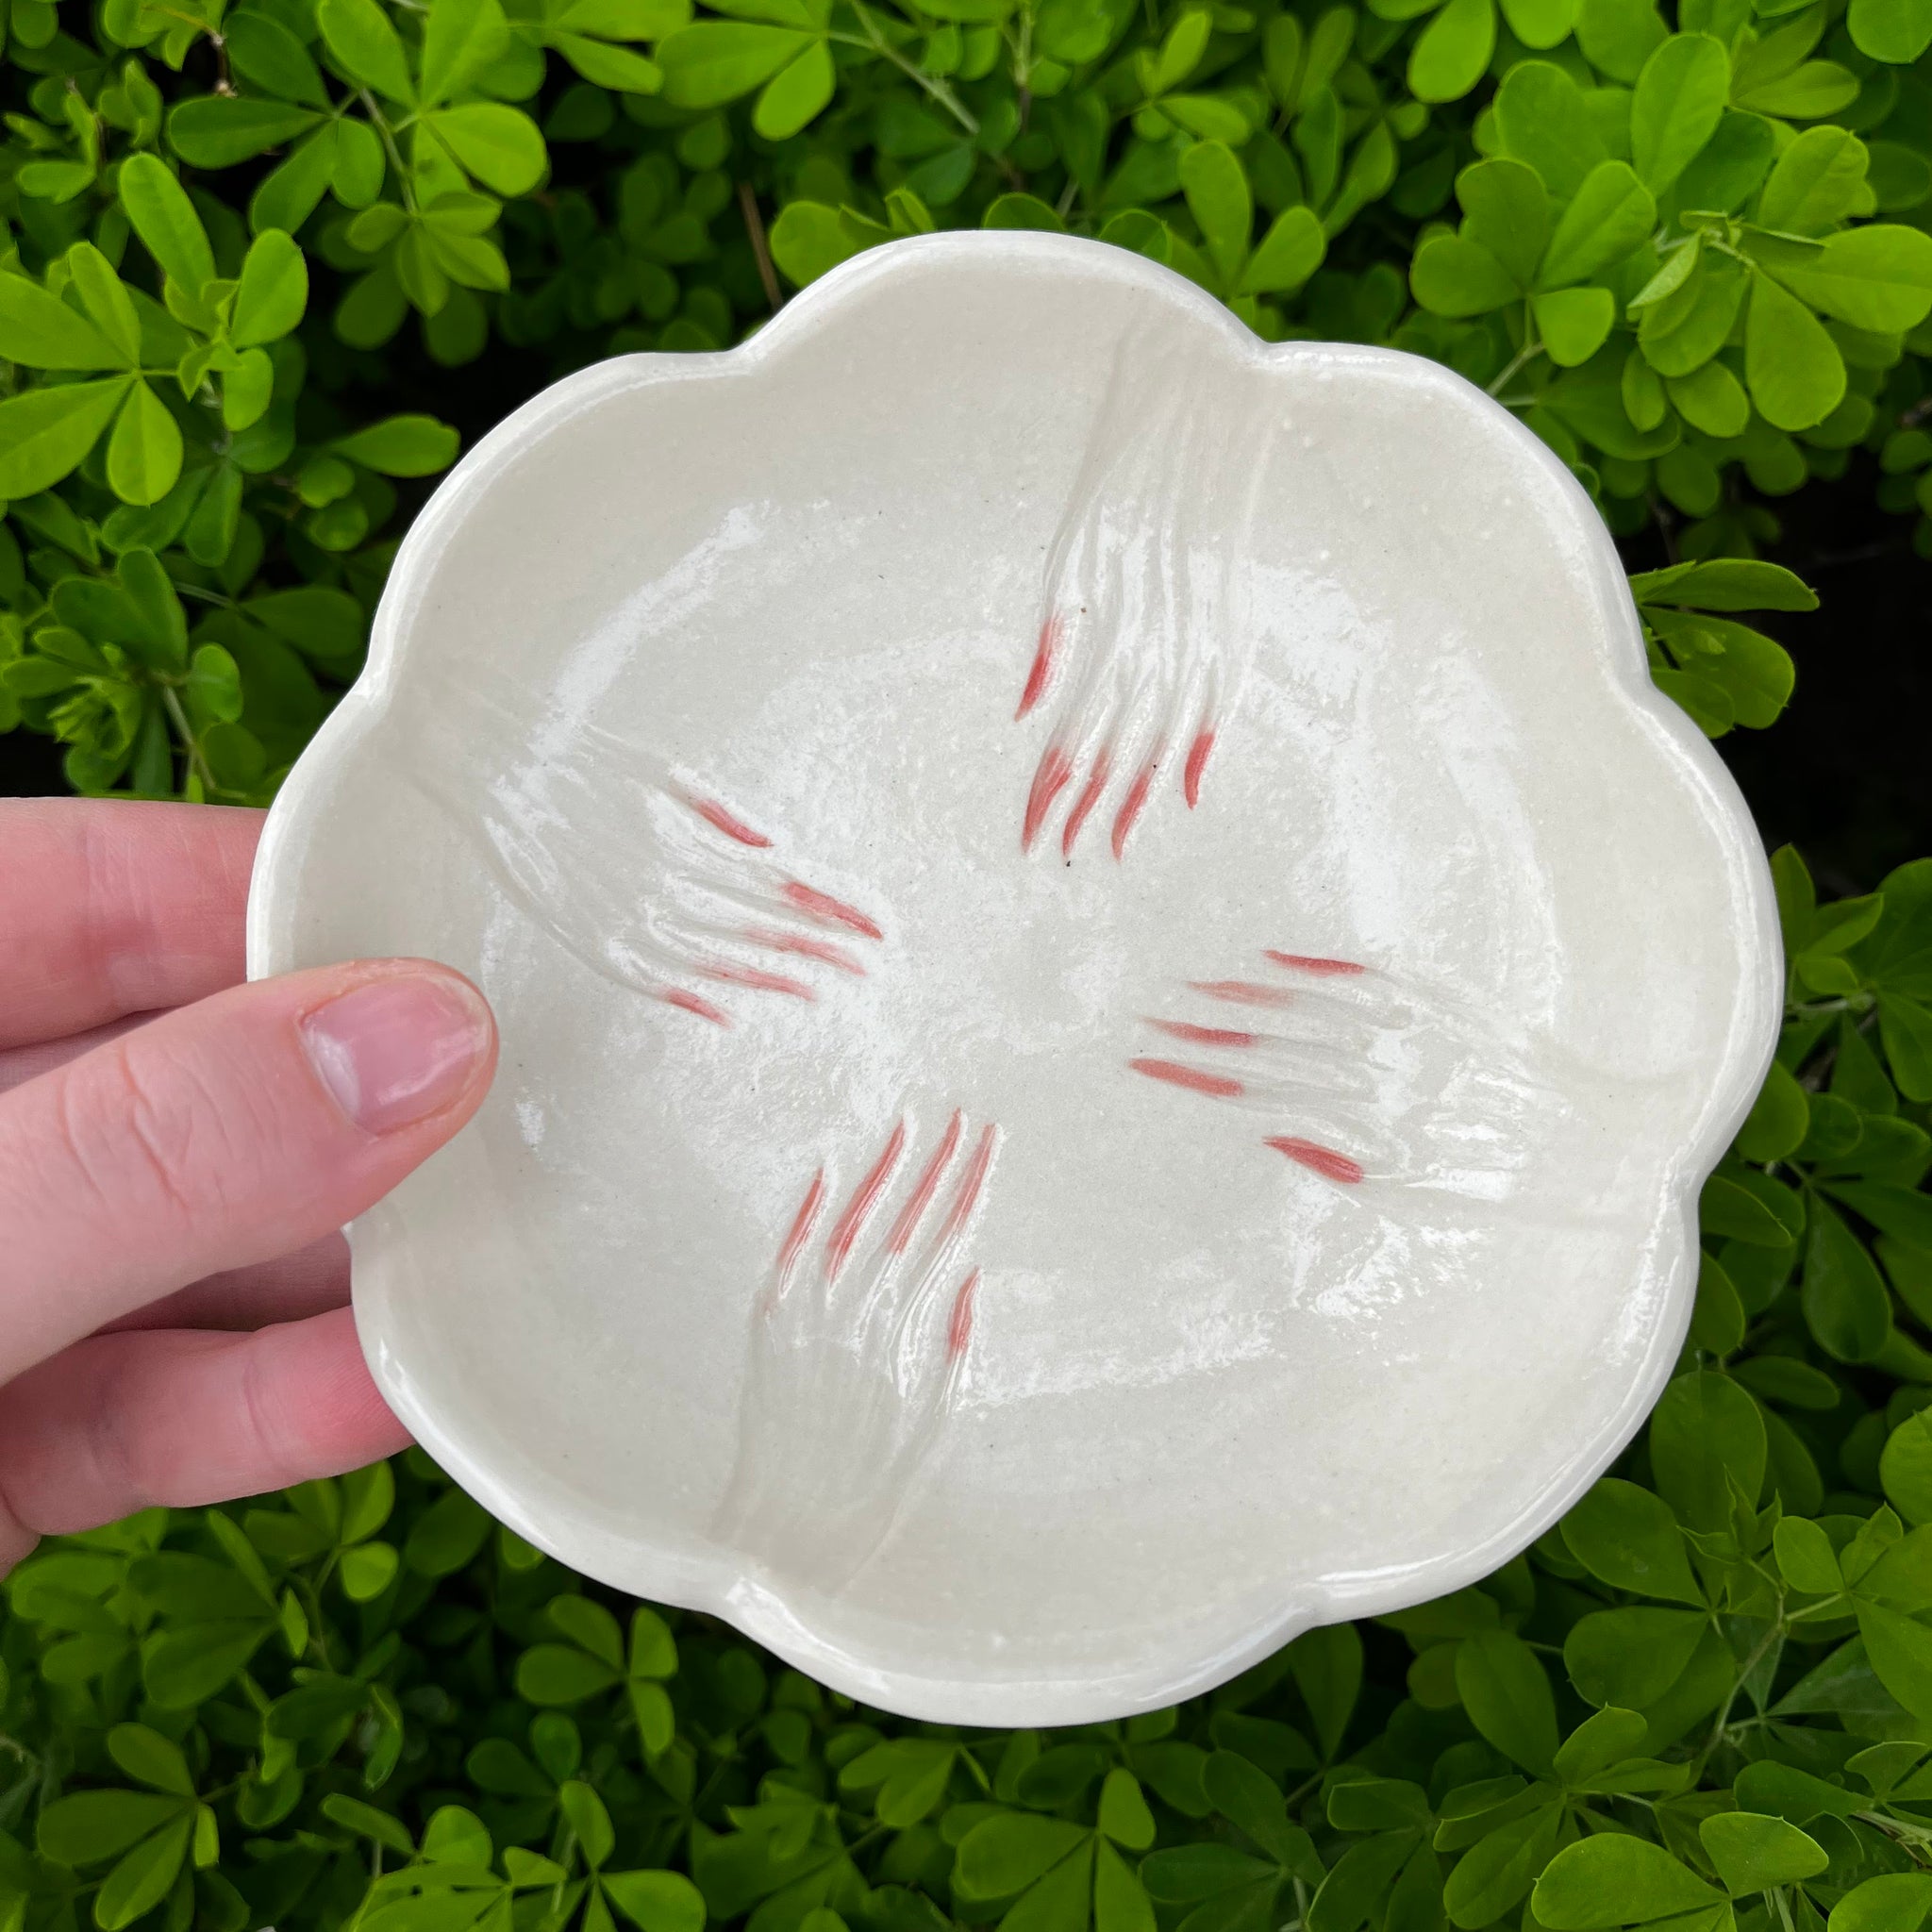 Hands Dish - Red Tips